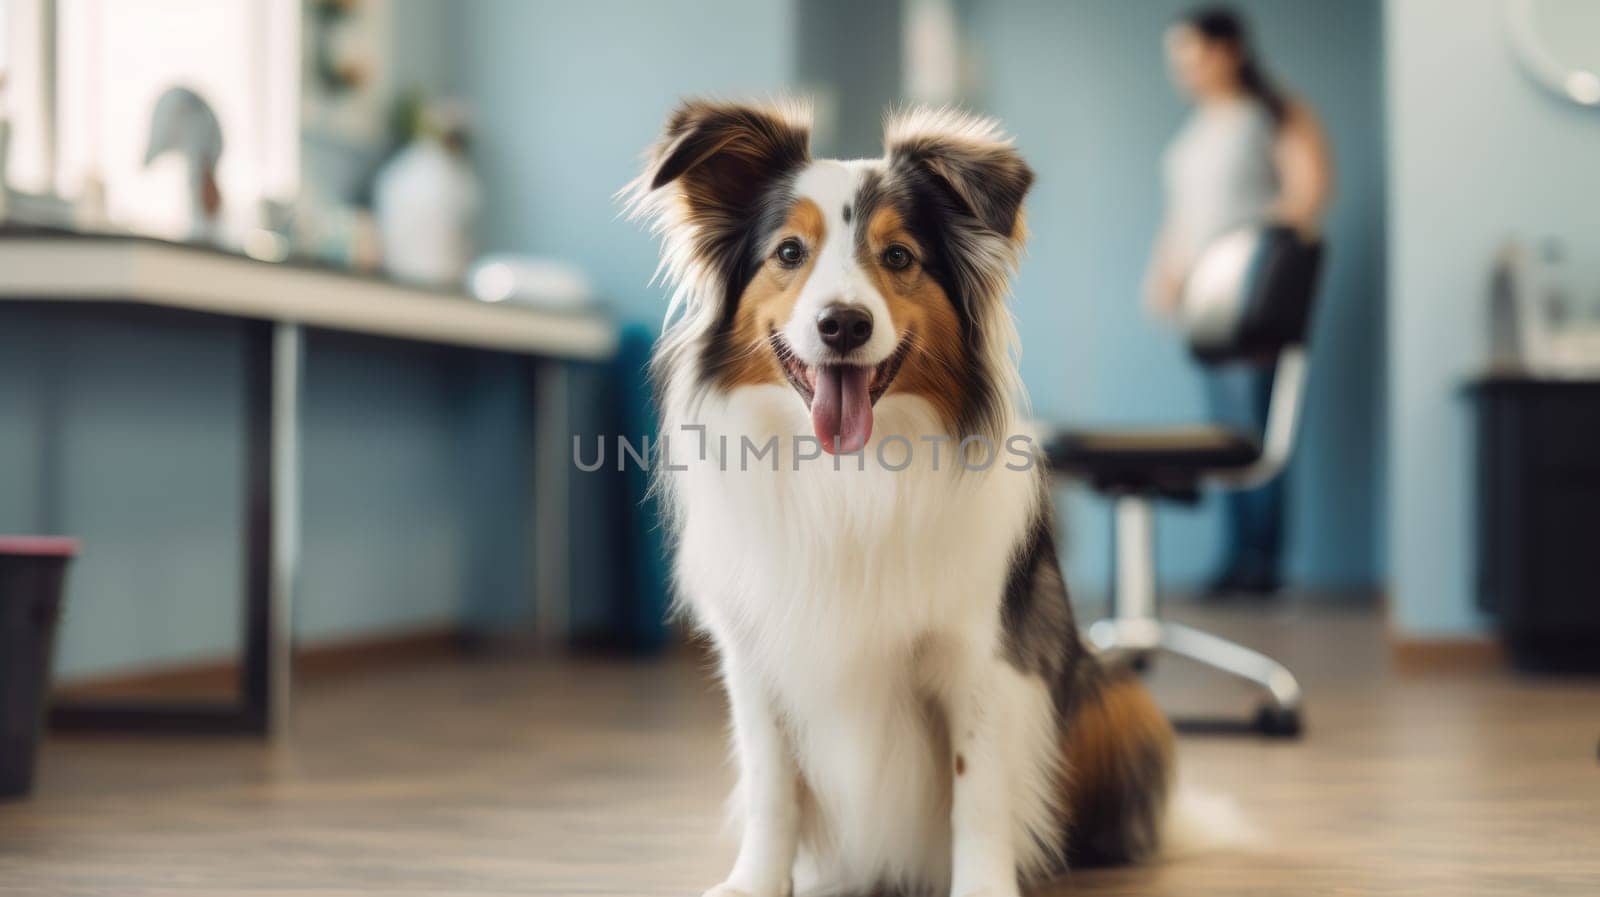 The dog sits on the floor in the home office. Blurred background. Healthy and happy pets concept. AI